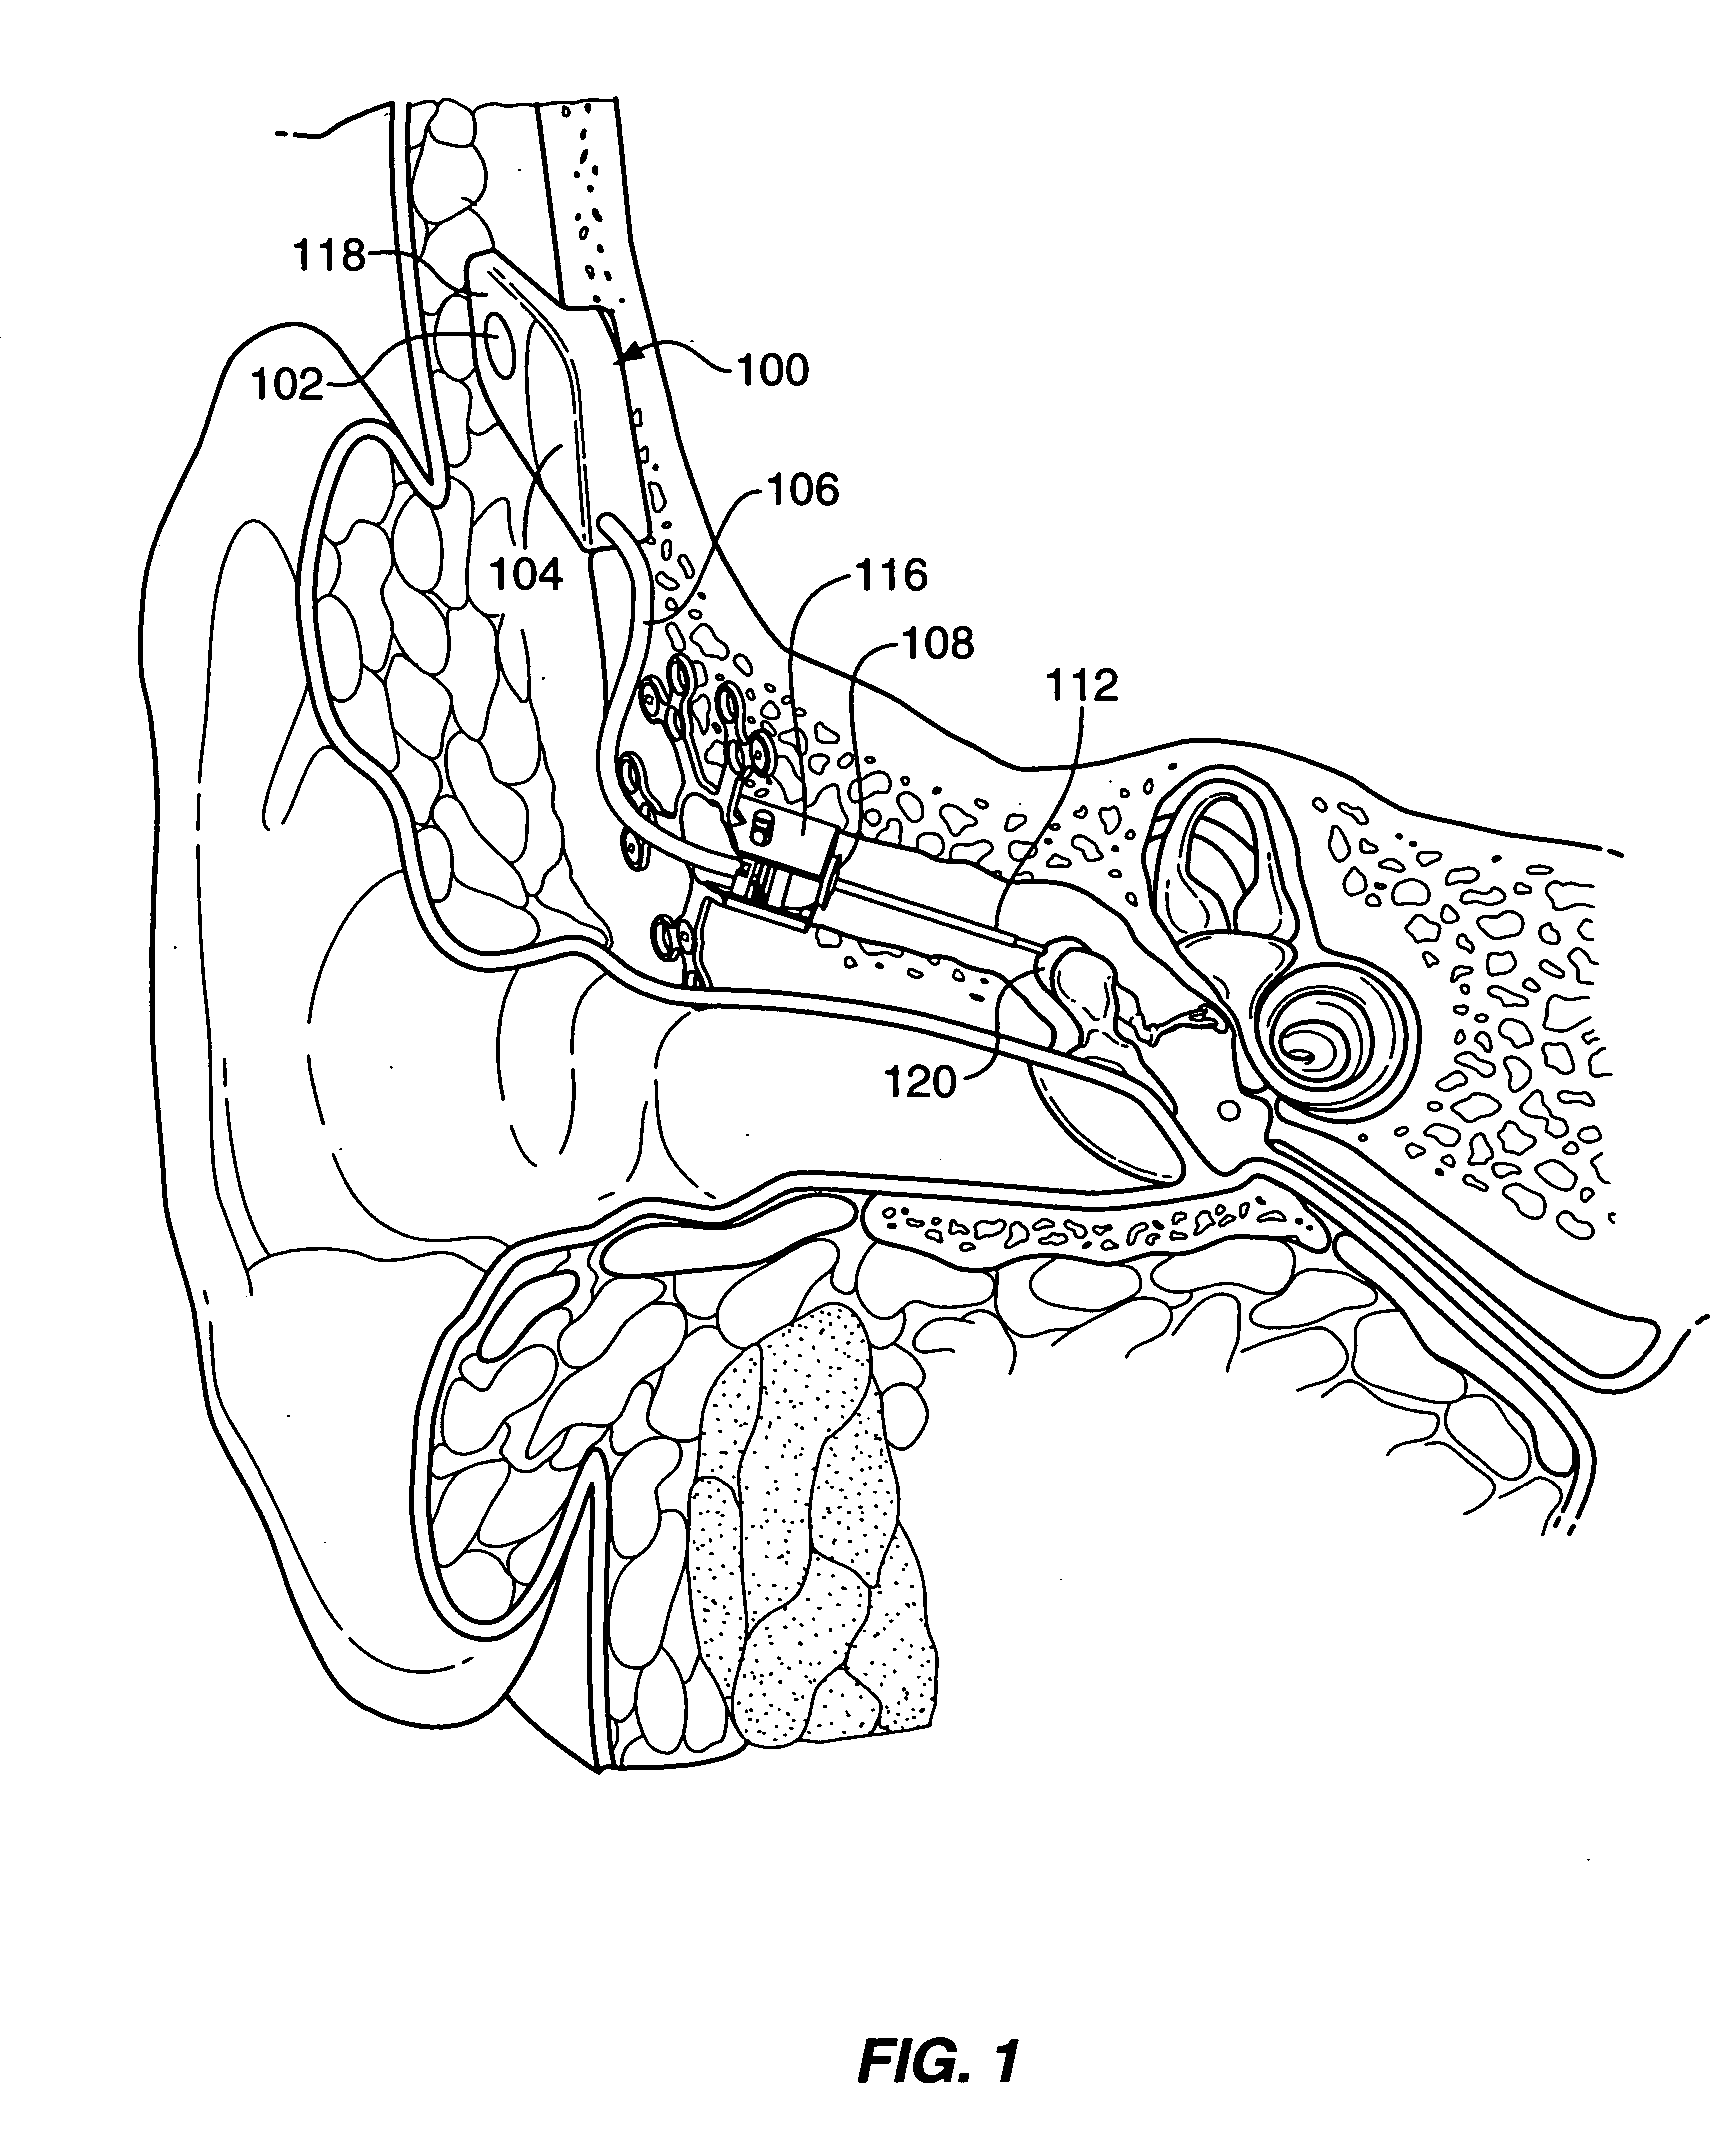 Implantable hearing aid transducer system